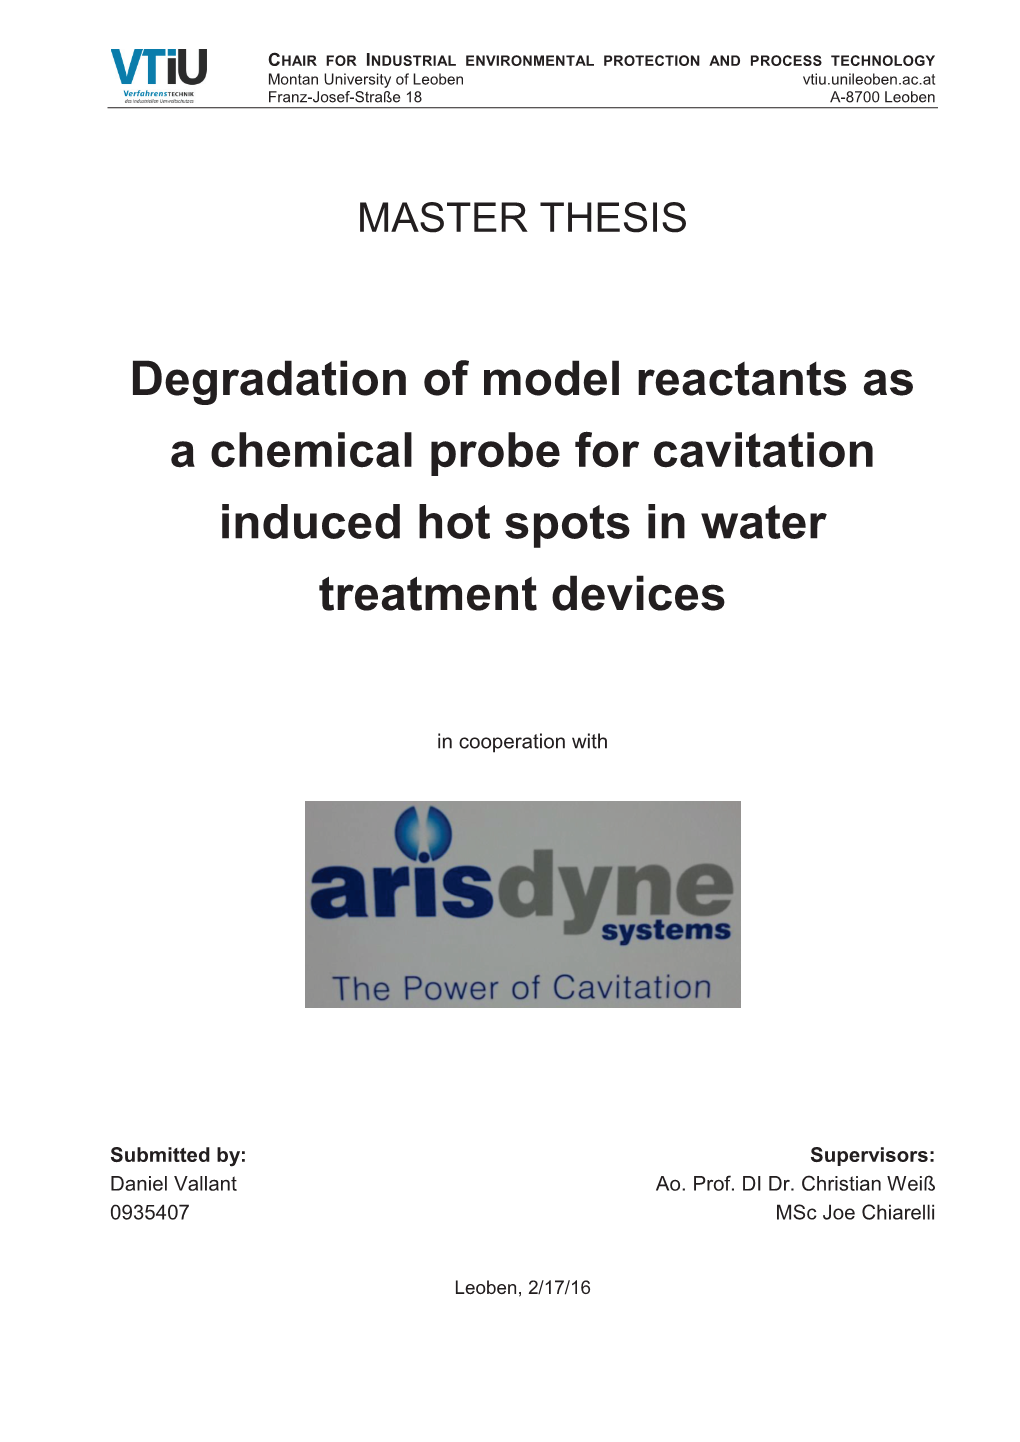 Degradation of Model Reactants As a Chemical Probe for Cavitation Induced Hot Spots in Water Treatment Devices